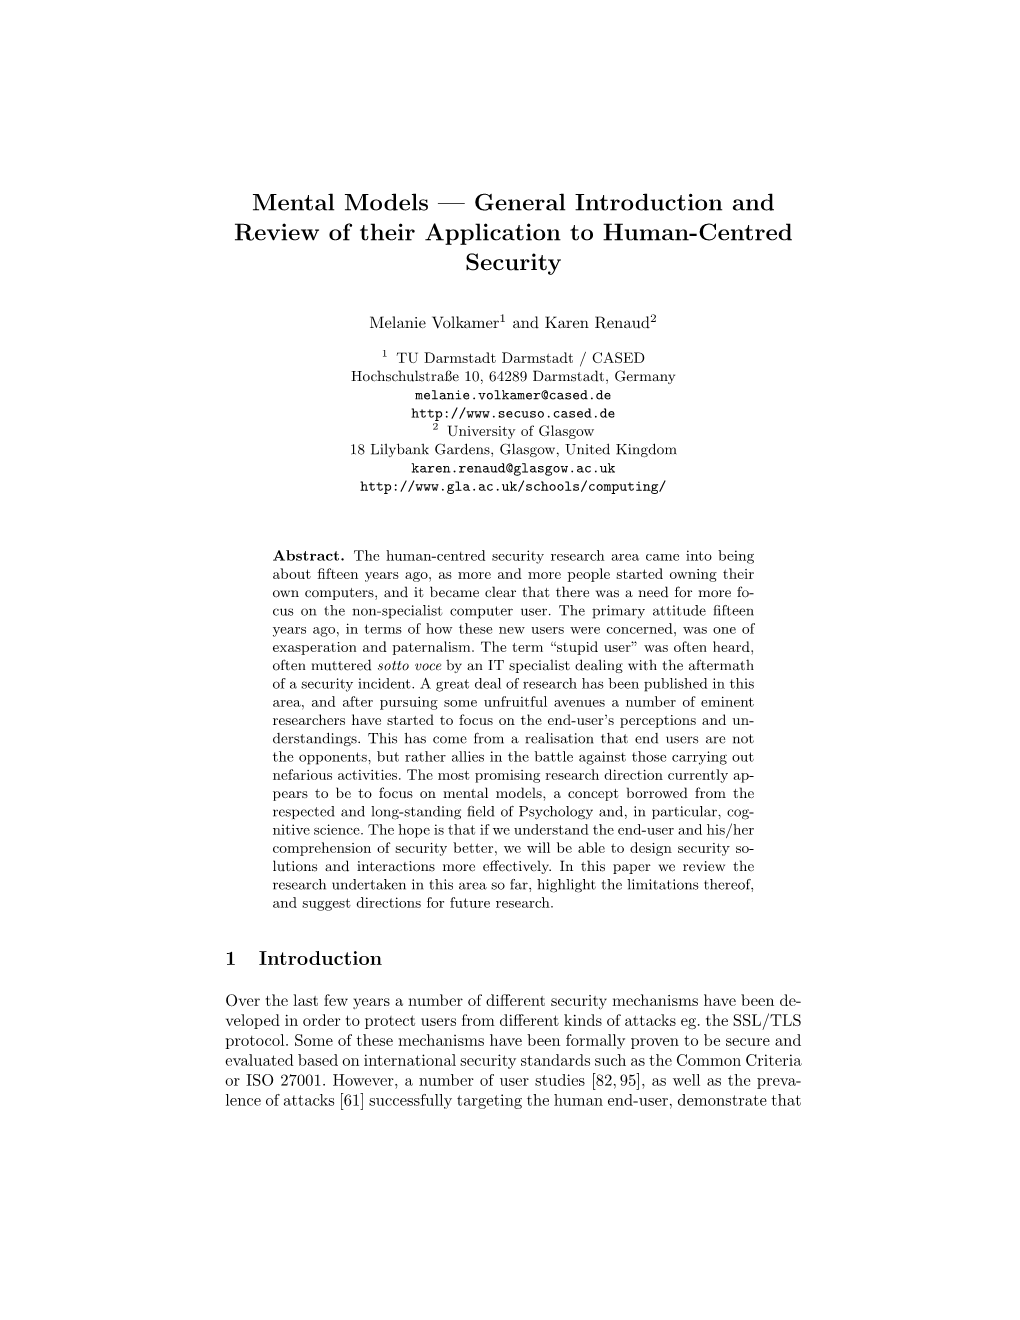 Mental Models — General Introduction and Review of Their Application to Human-Centred Security